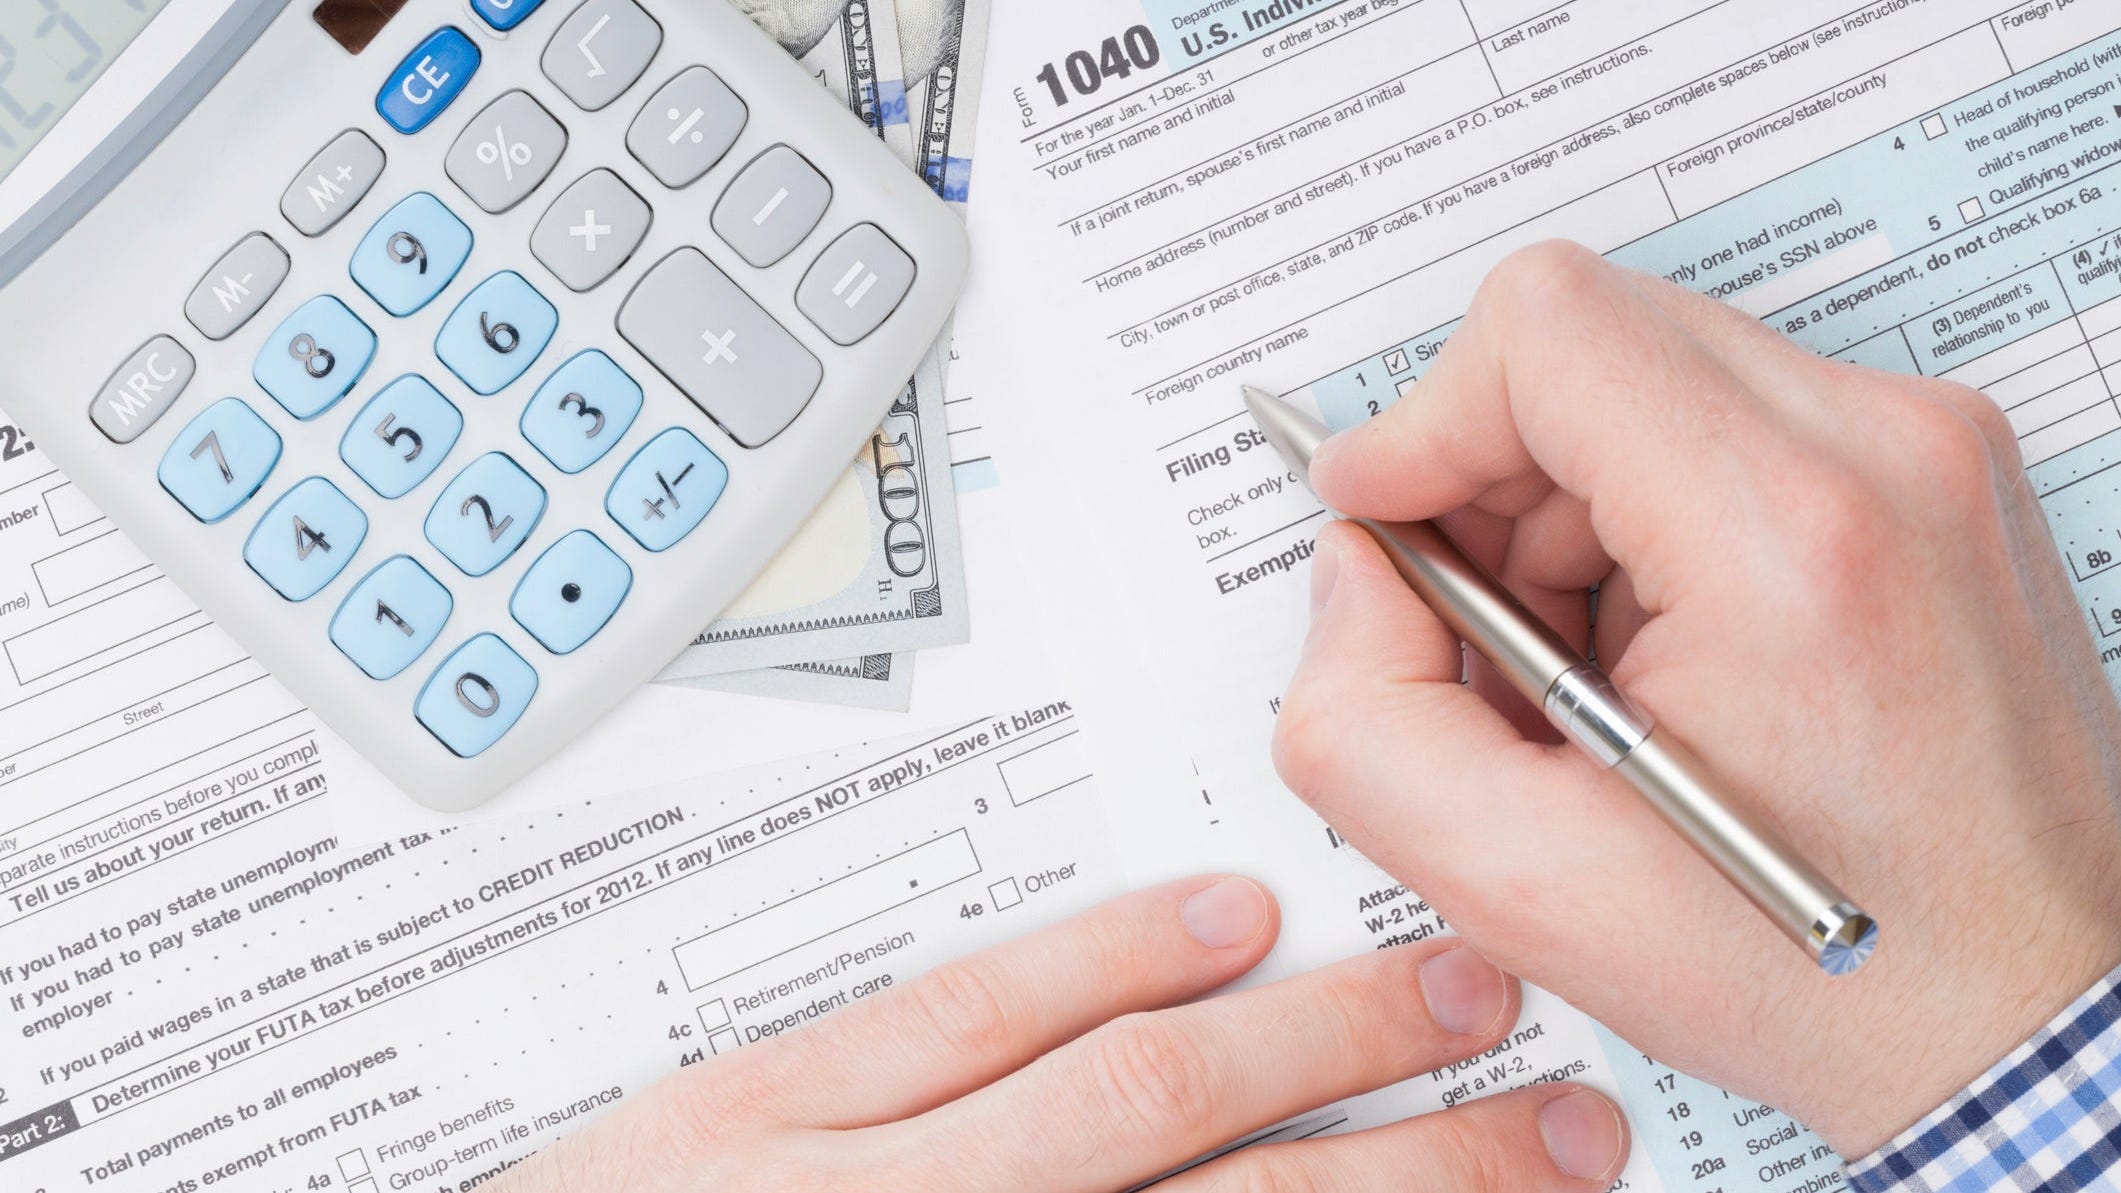 Where is my refund 2020: How long does it take IRS to process taxes?